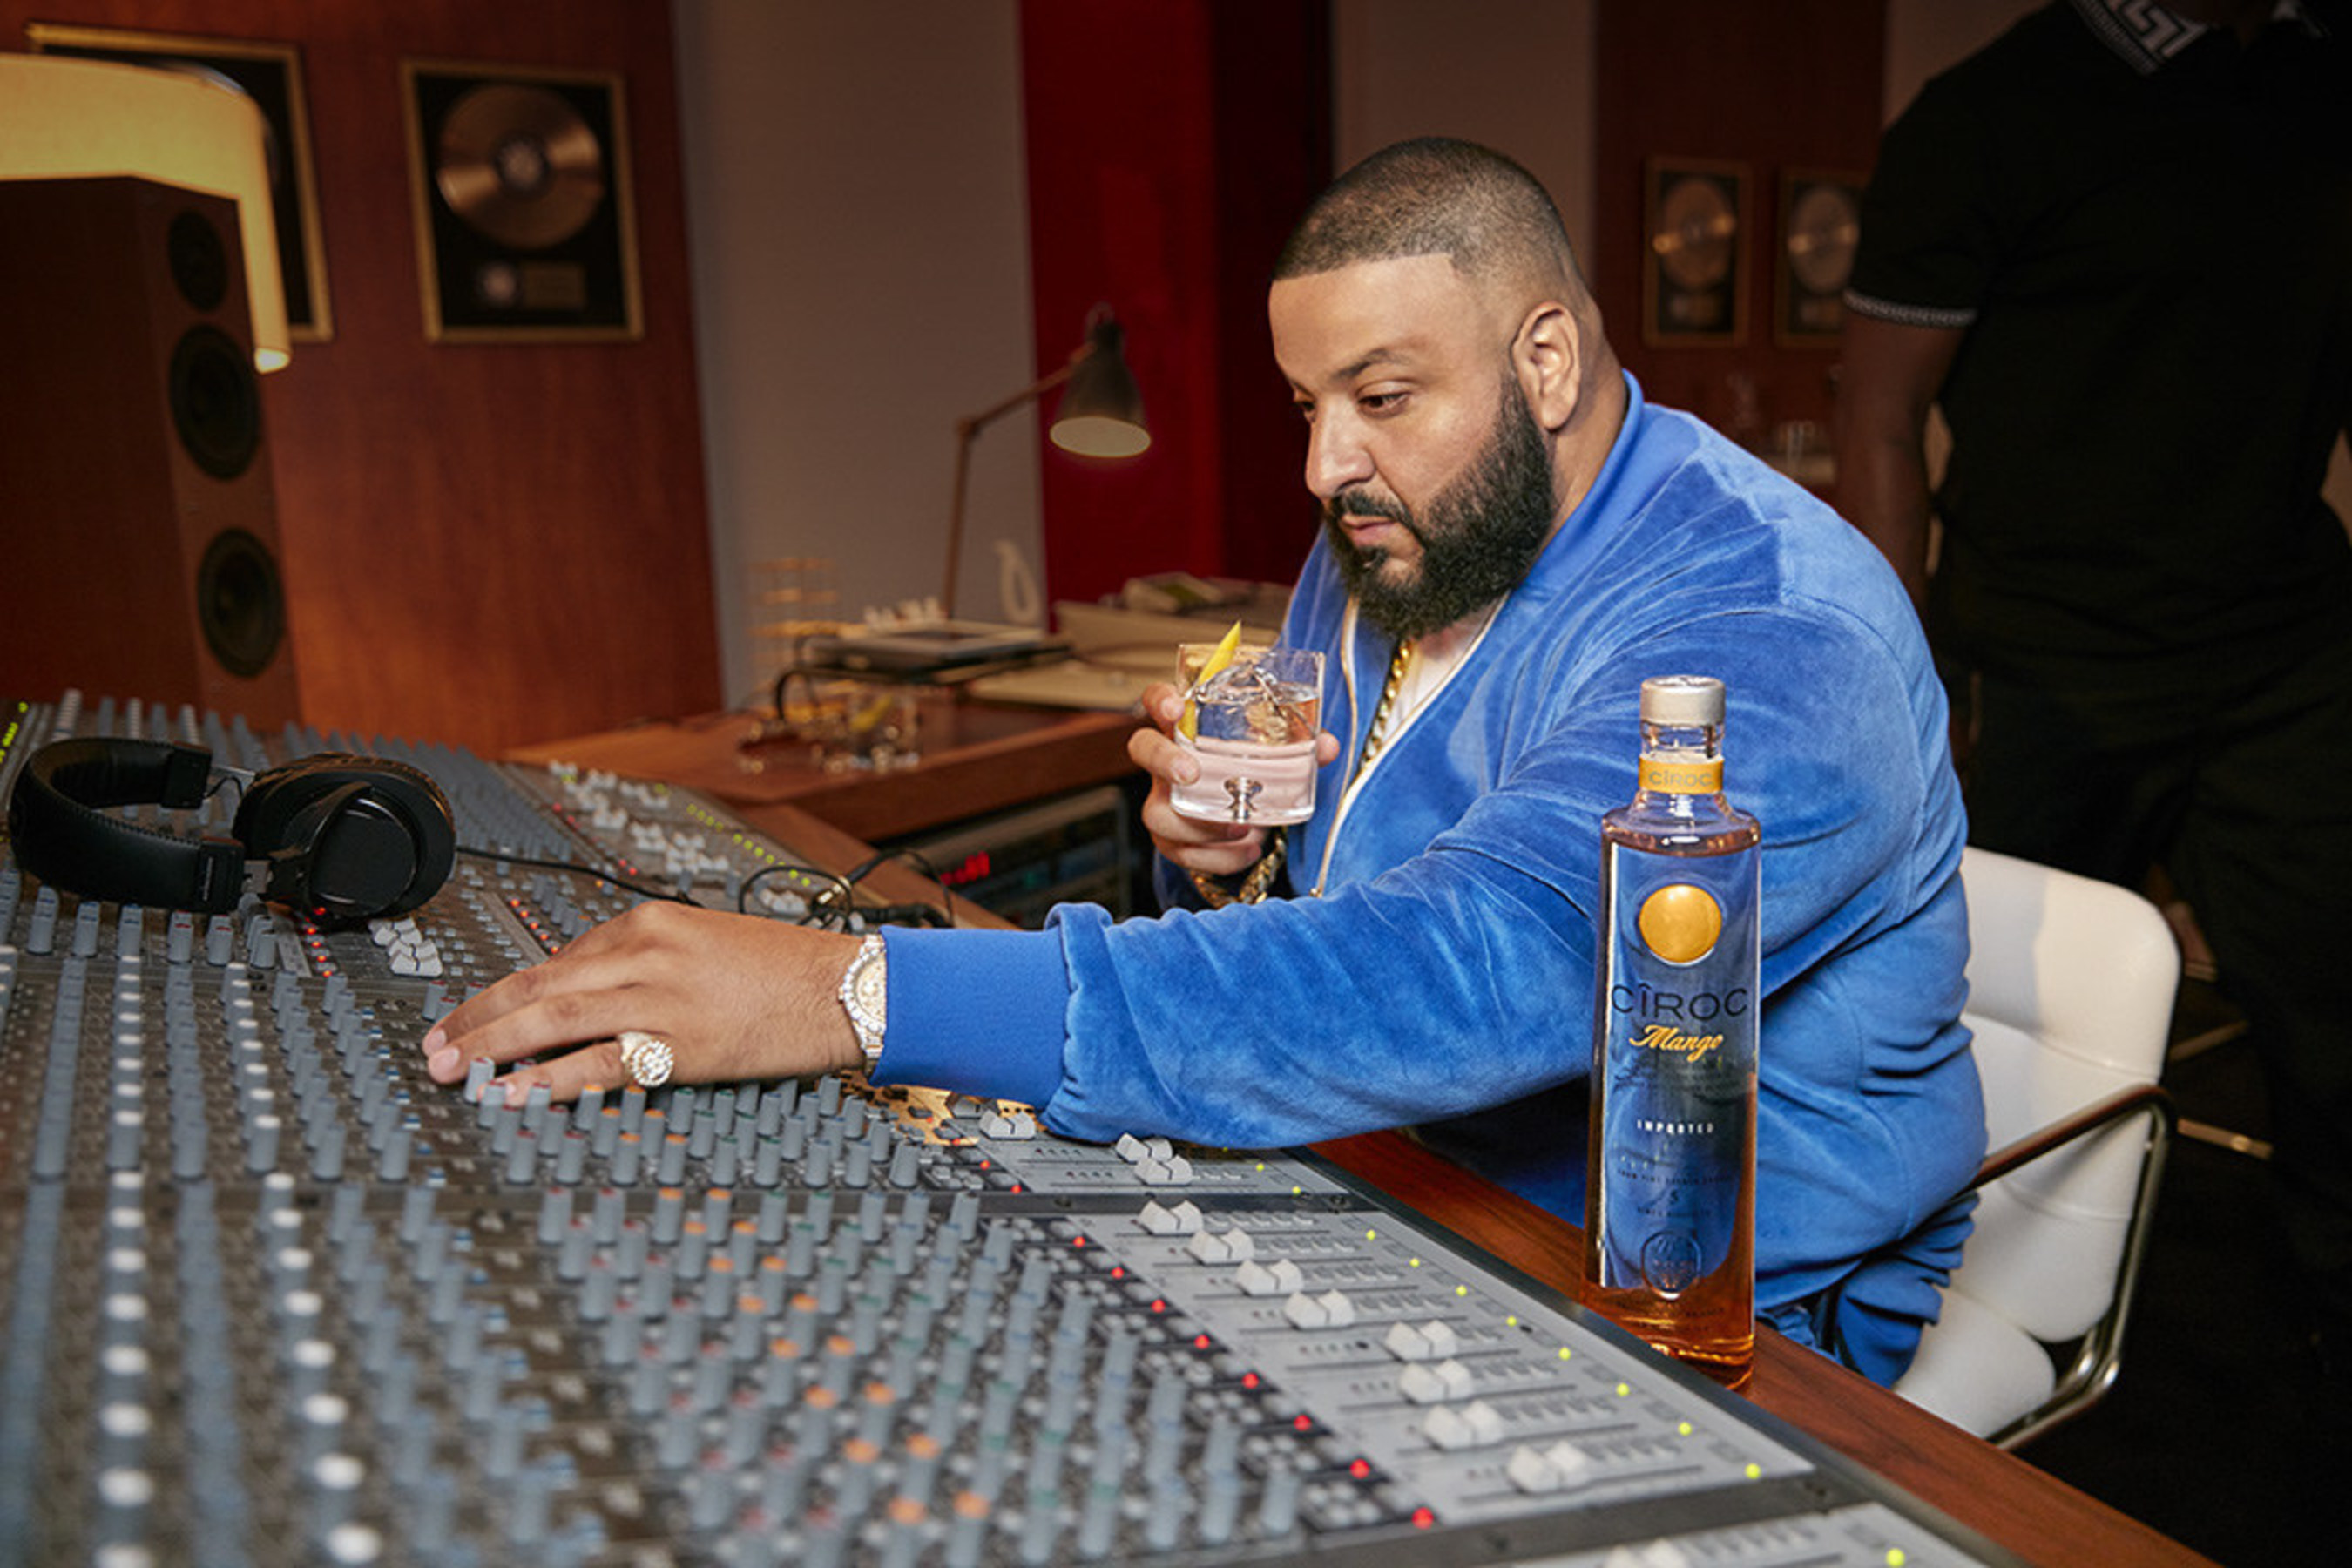 SEAN "DIDDY" COMBS AND THE MAKERS OF CÎROC ULTRA PREMIUM EXTEND ENTREPRENEUR MOVEMENT WITH DJ KHALED AND NEW CÎROC MANGO